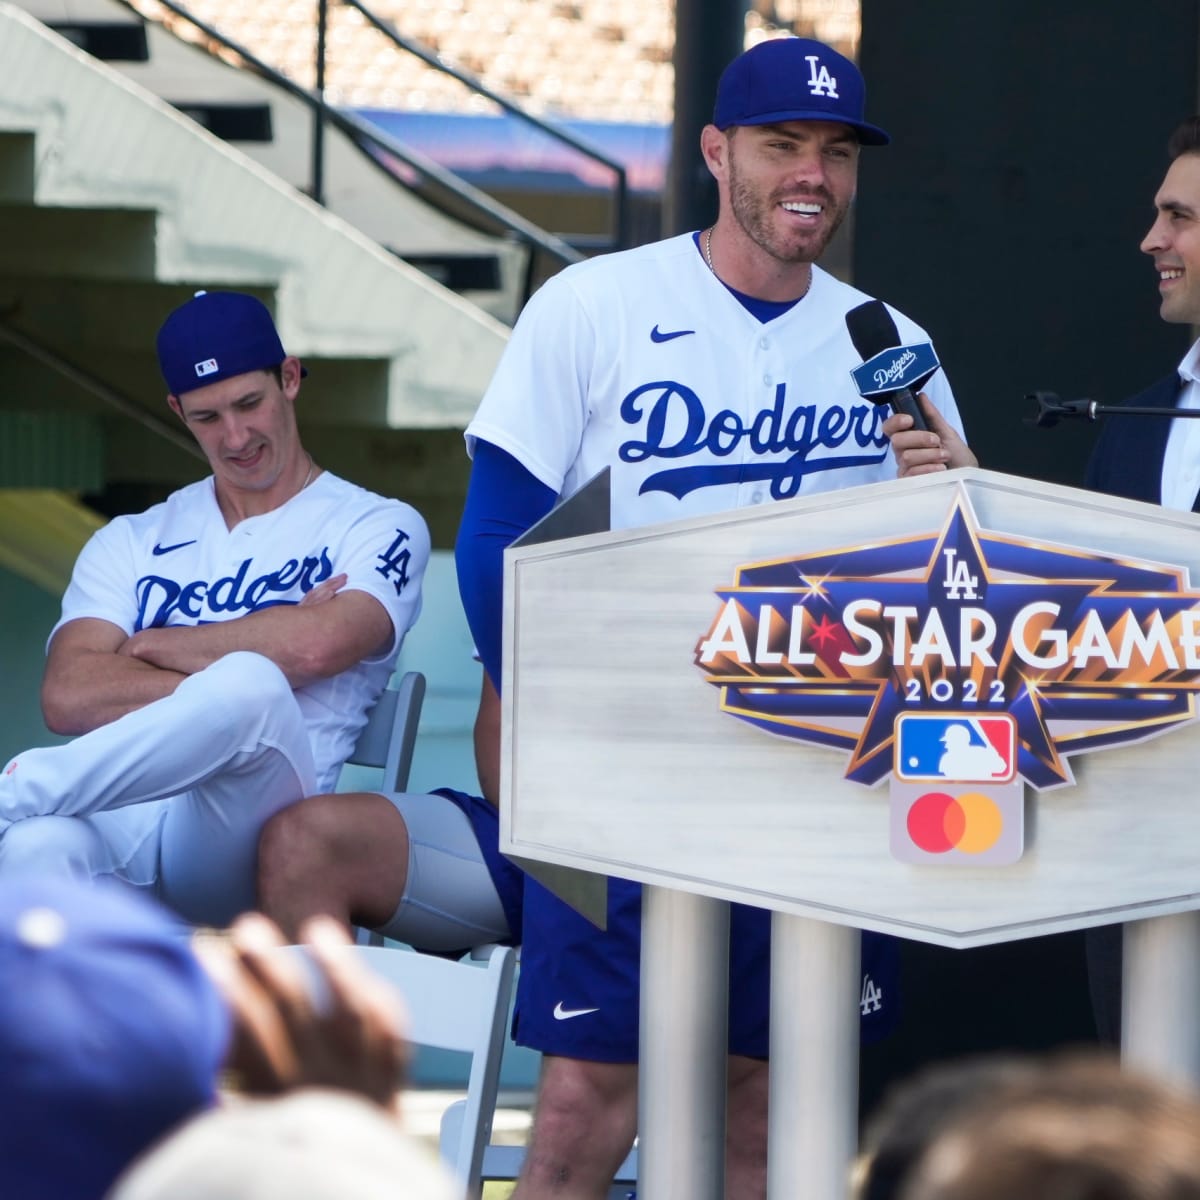 Dodgers Announce All-Star Game Events - Inside the Dodgers